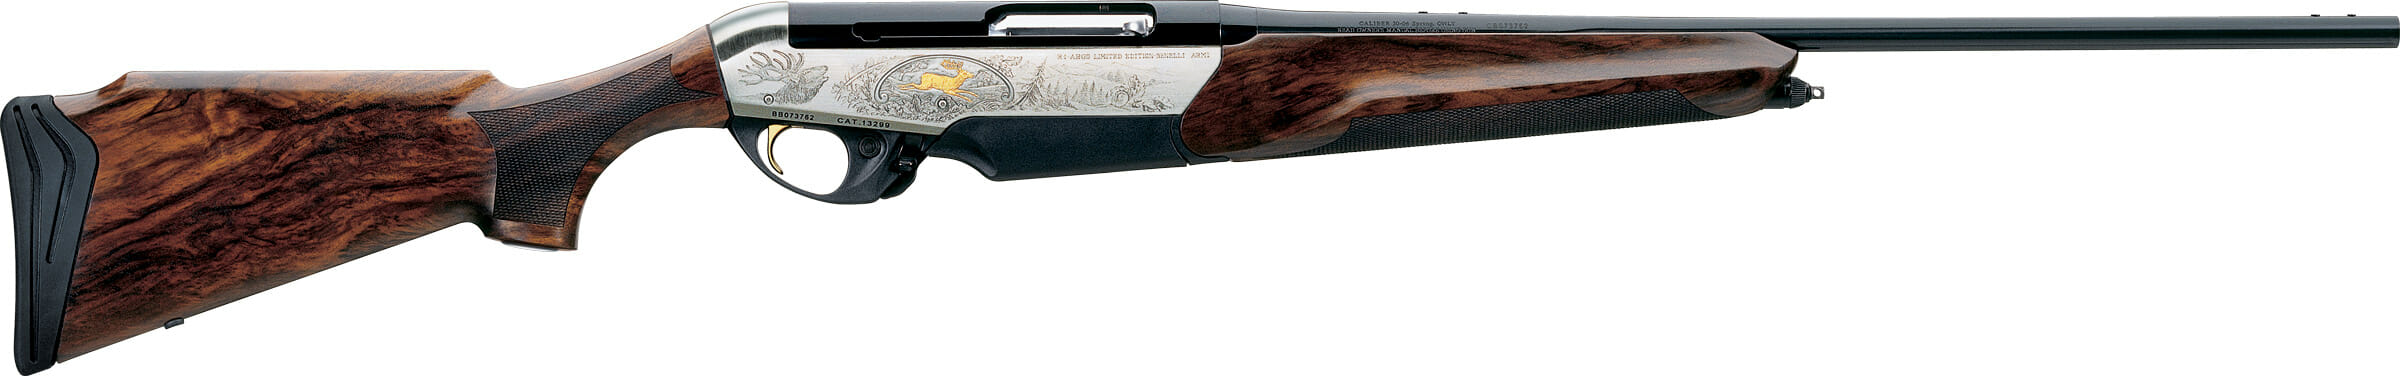 The 10 Best Hunting Rifles: The Benelli R1 Rifle - Off The Grid News.